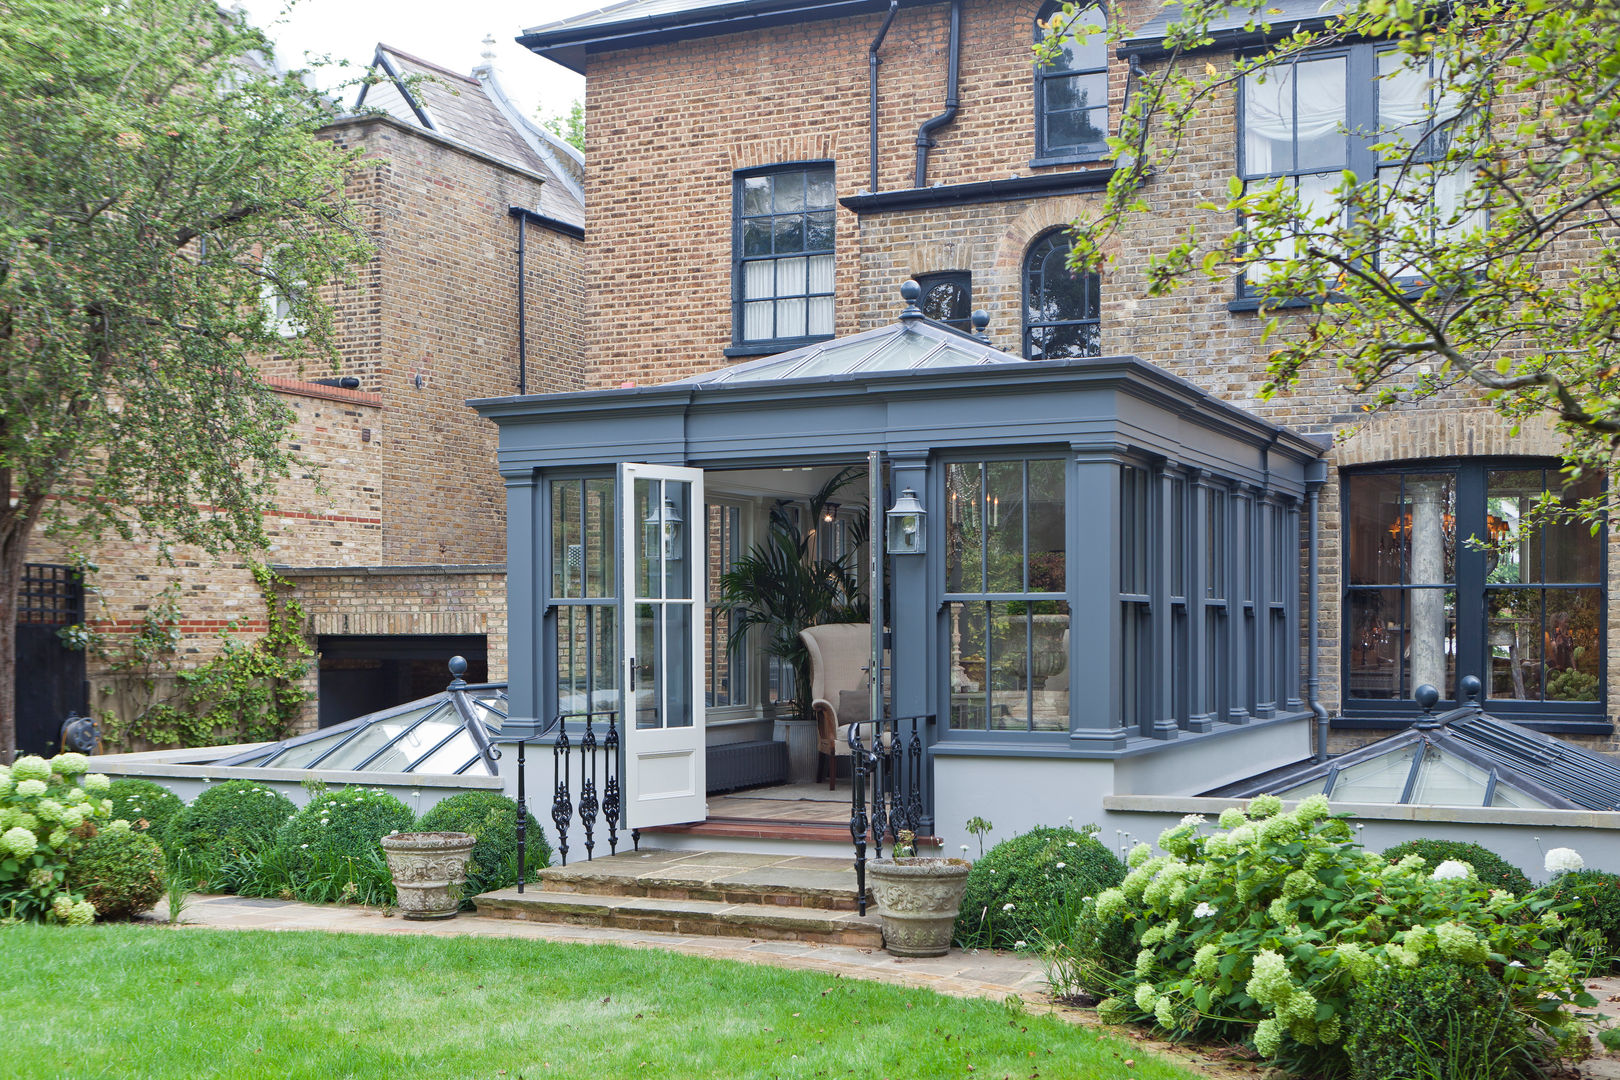 Dual Level Orangery and Rooflights Transform a London Townhouse Vale Garden Houses เรือนกระจก